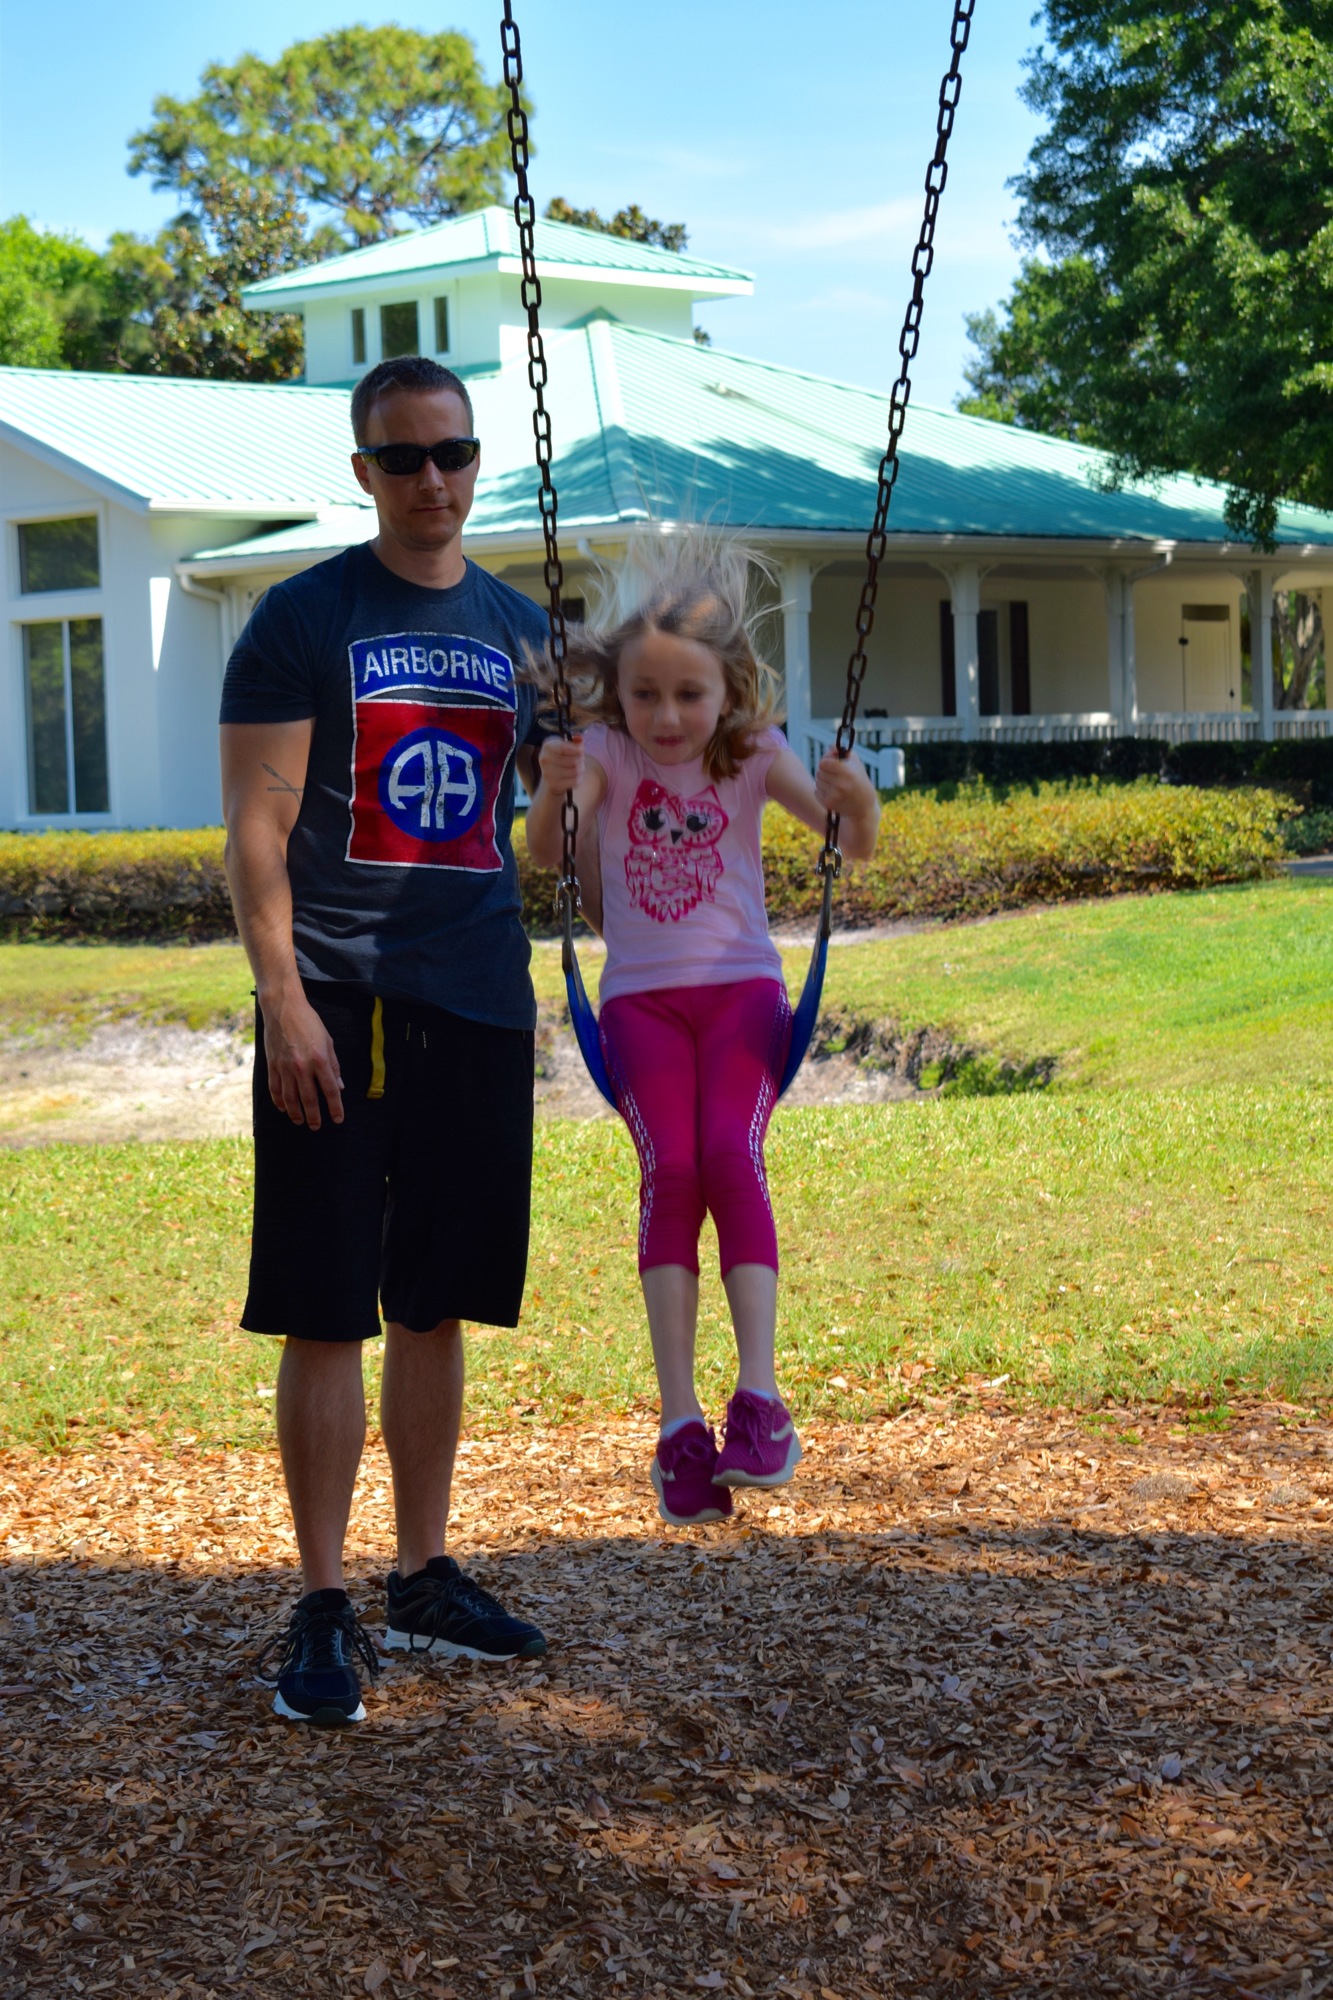 Sean Otter, a Lakewood Ranch resident, pushes his daughter Carina on a swing at Summerfield Community Park. Otter says finding daycare while schools are out an extended period of time can be hard.